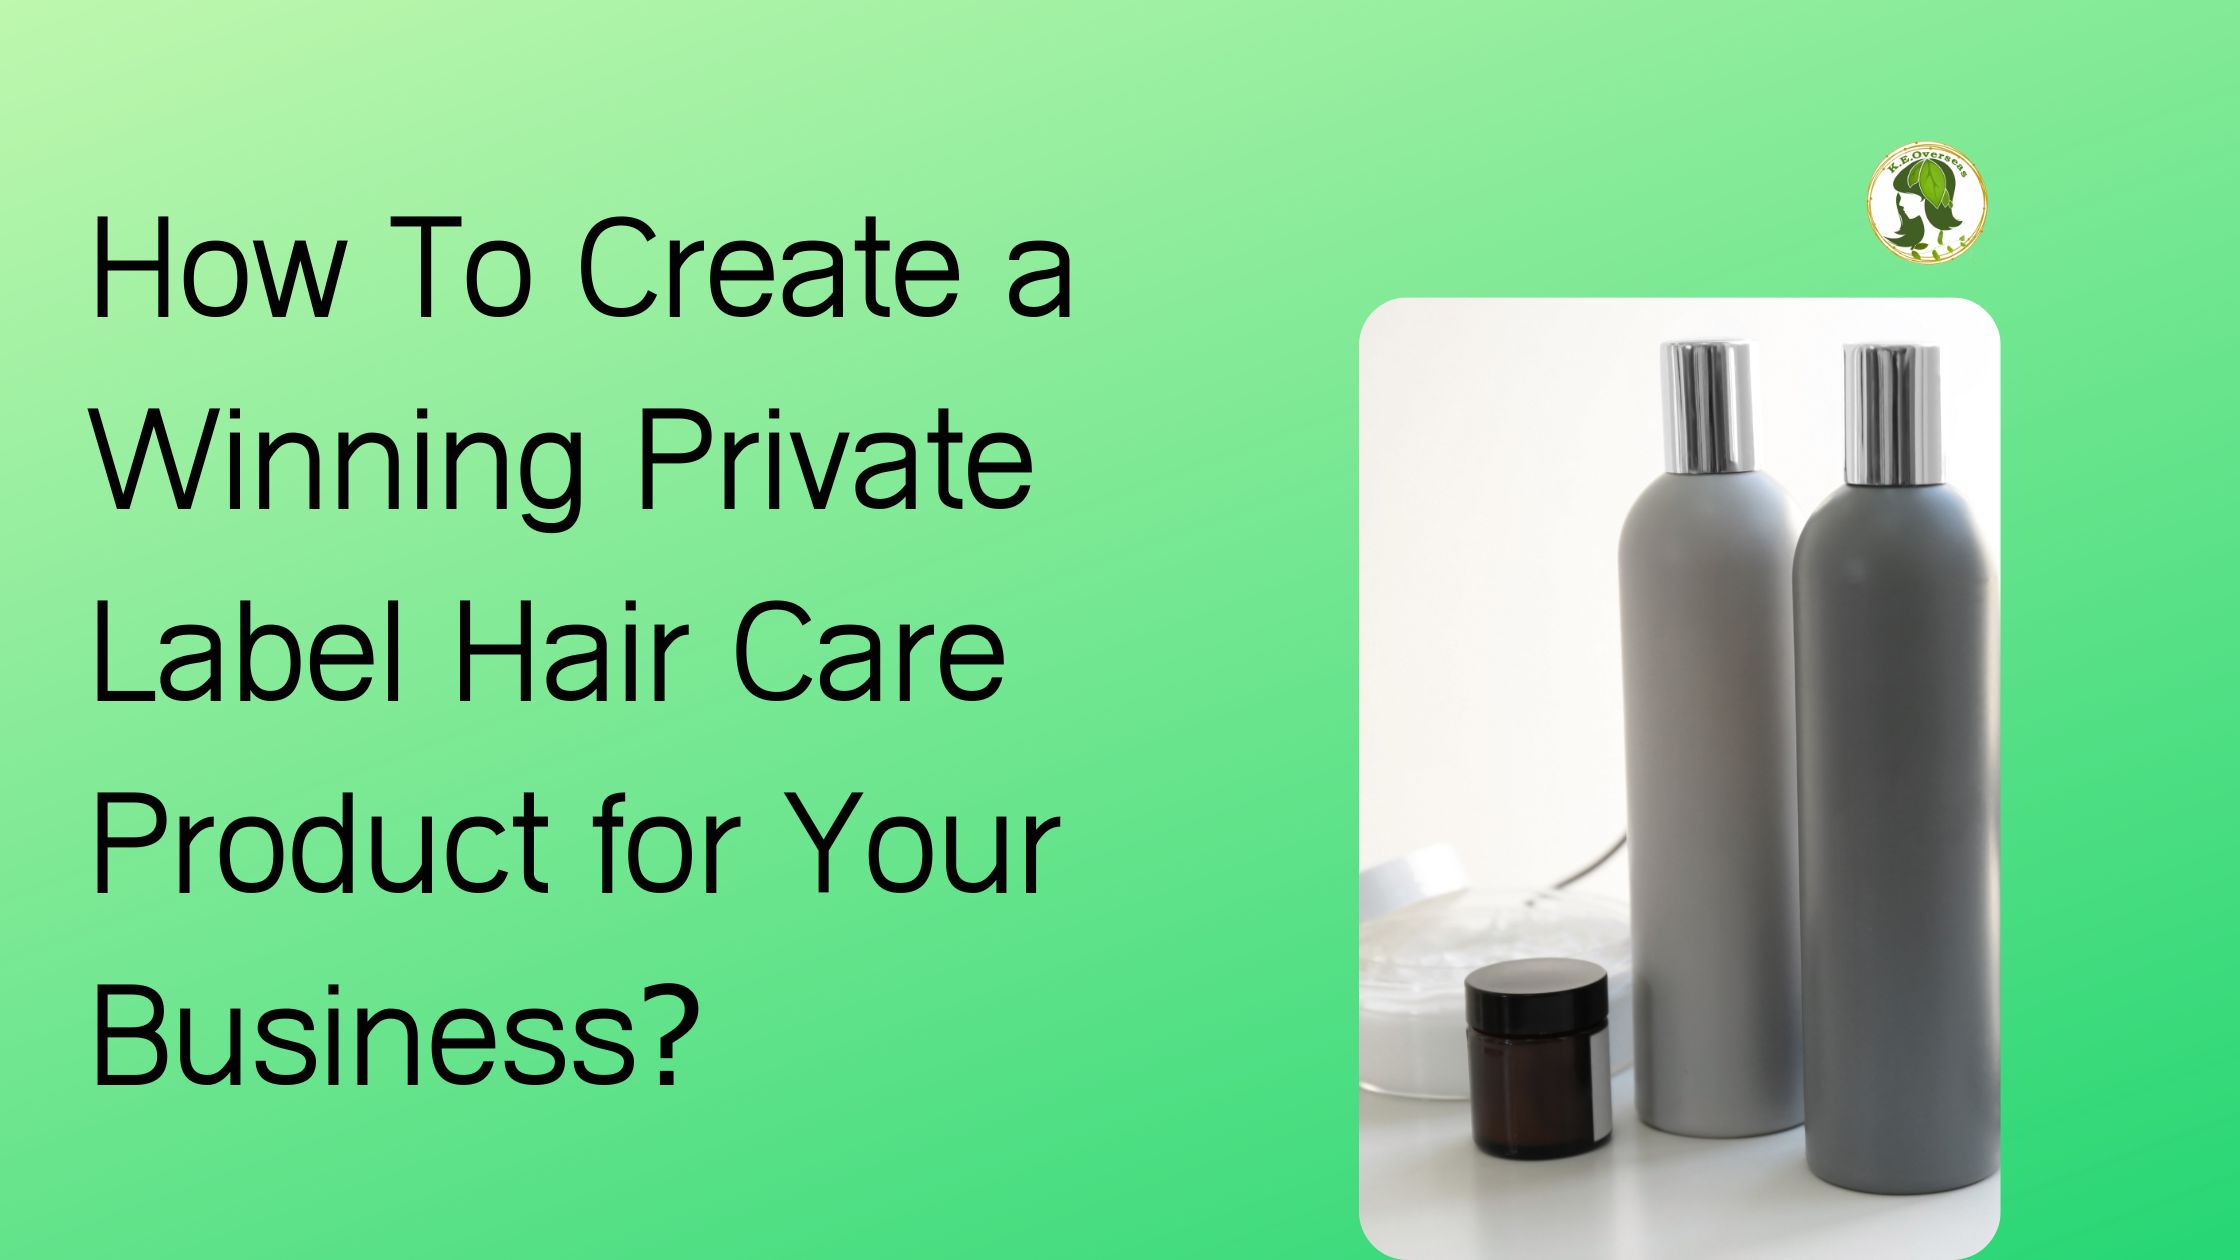 How To Create a Winning Private Label Hair Care Product for Your Business